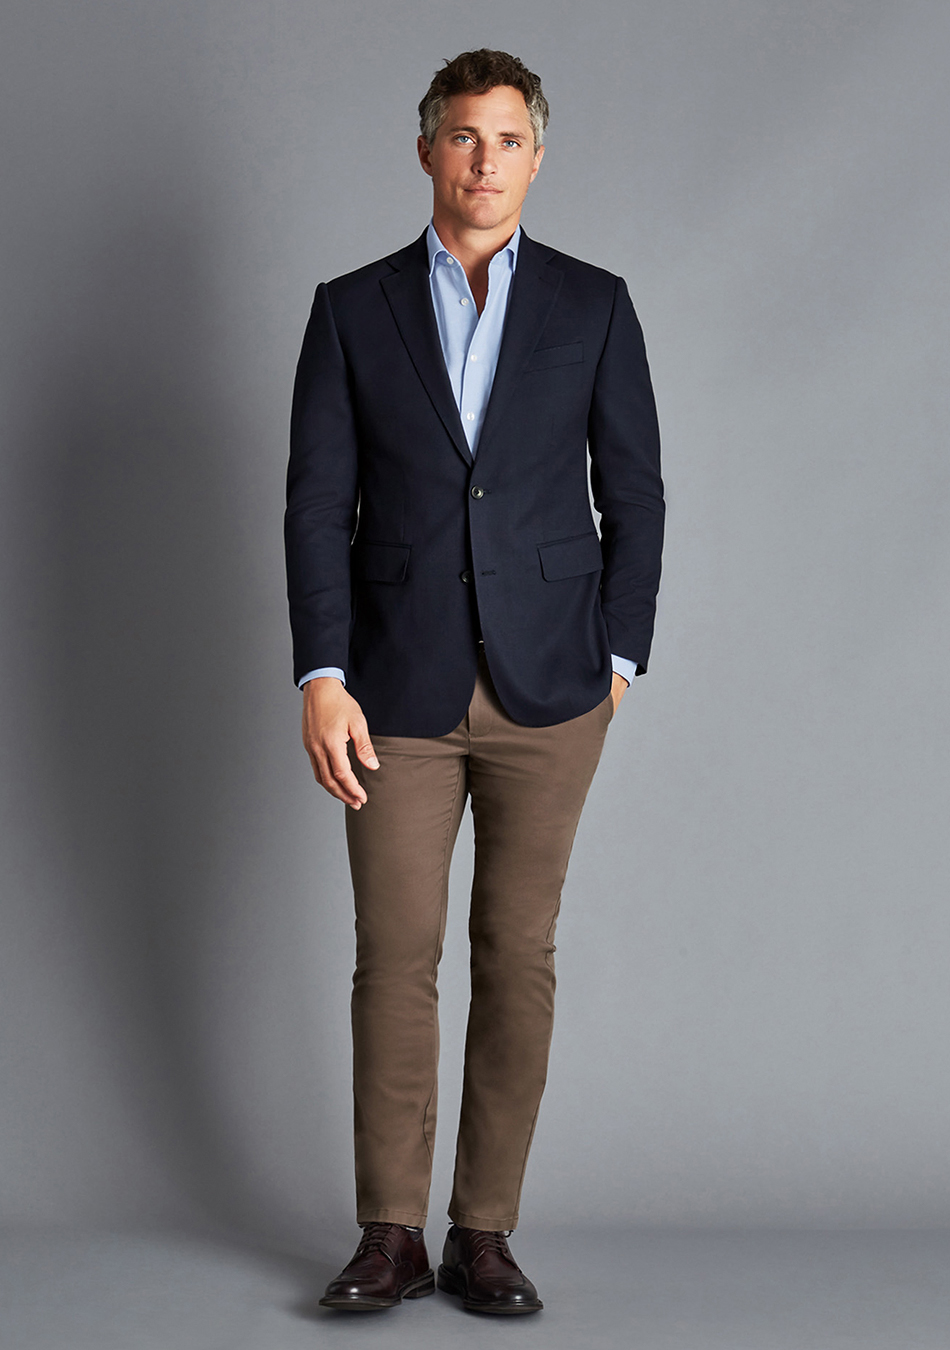 Navy blazer, light blue dress shirt, brown jeans, and brown derby shoes